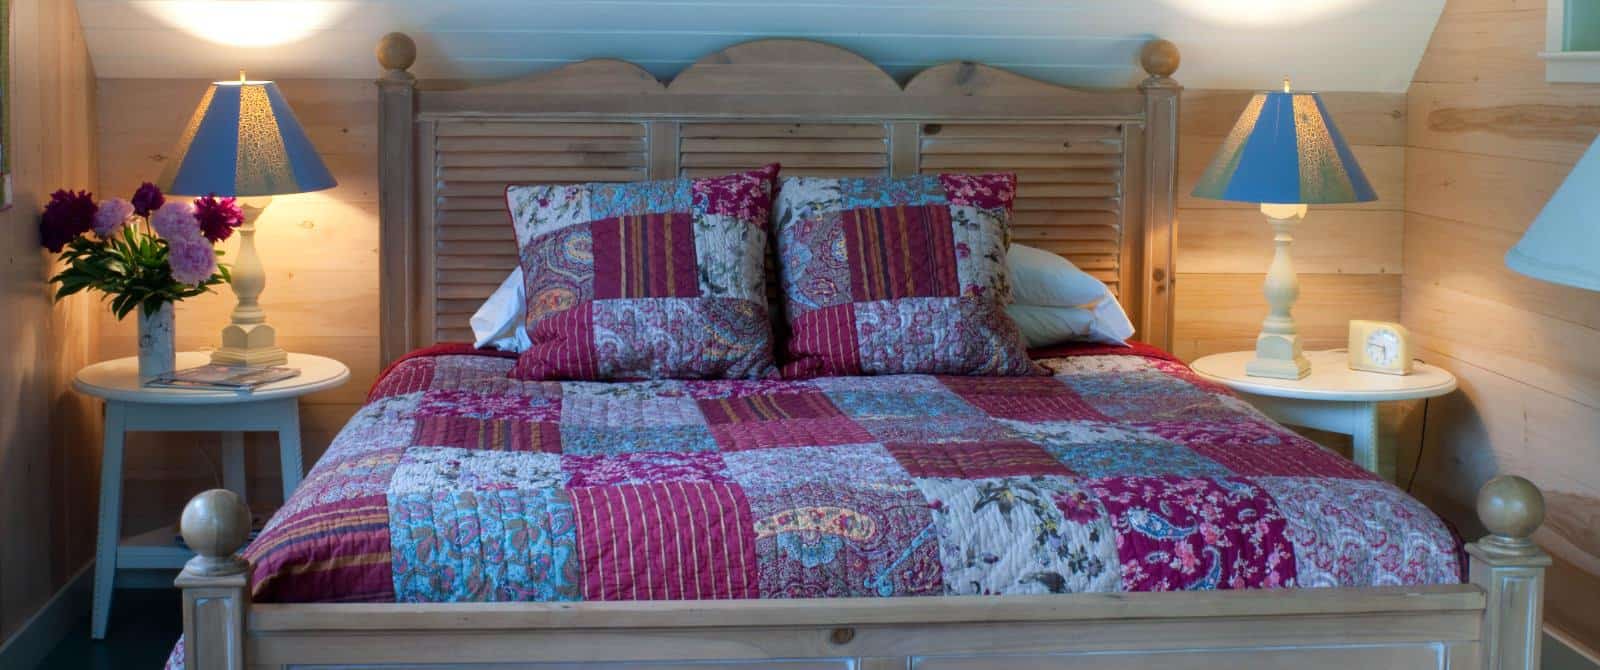 Pretty wooden bed made up with a pink quilt next two two white wooden side table with blue-shaded lamps.